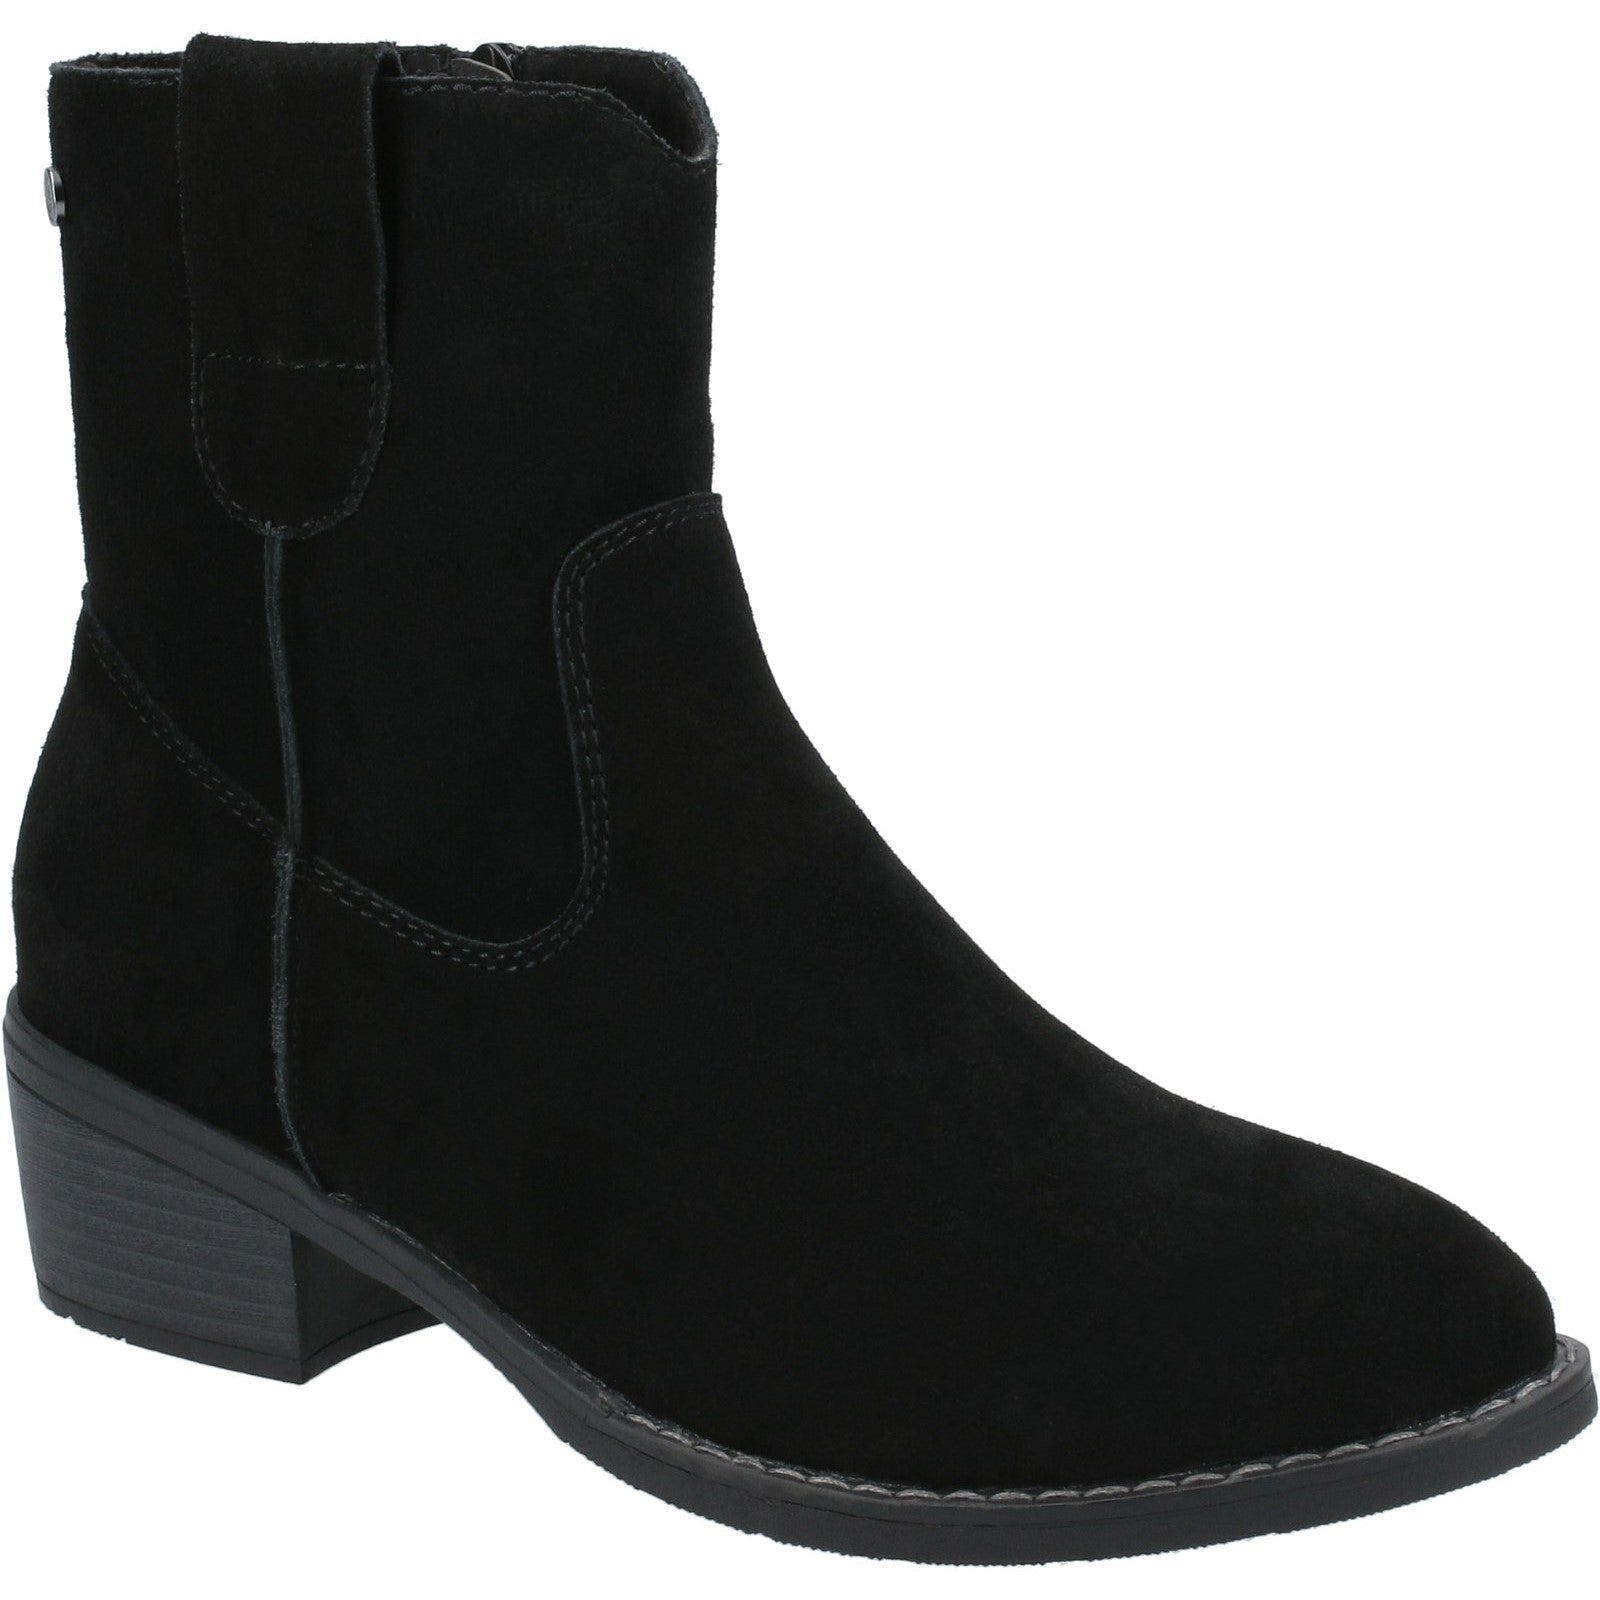 Ladies Ankle Boots Black Hush Puppies Iva Ladies Ankle Boots